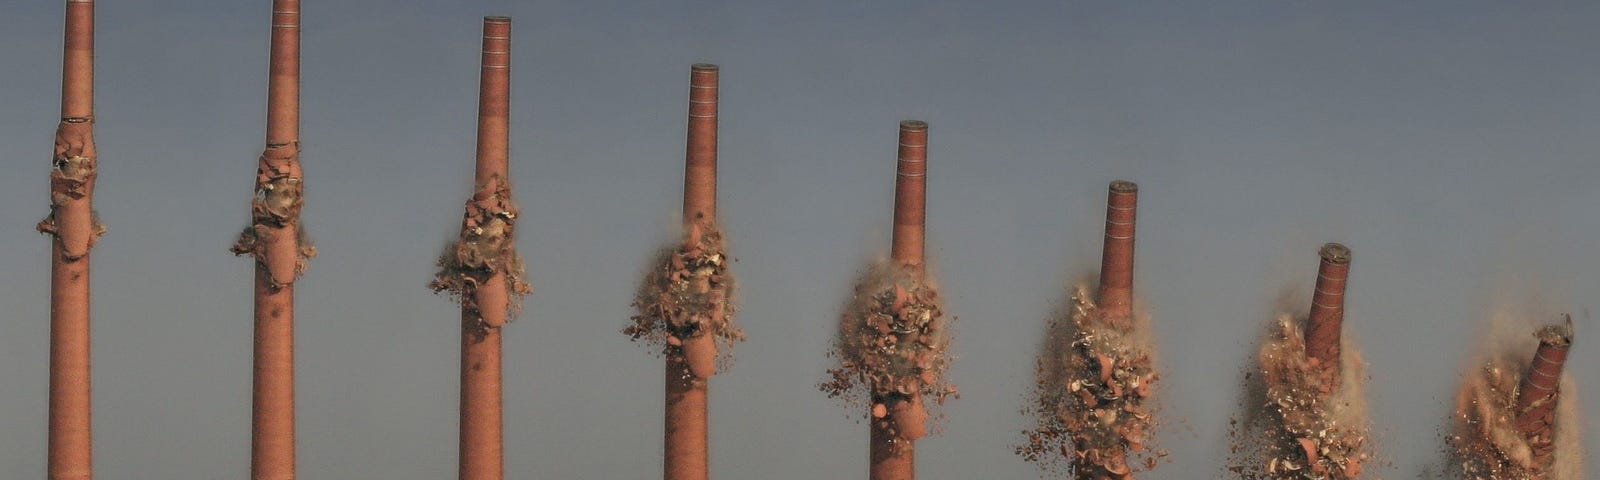 An image of a set of chimneys being demolished